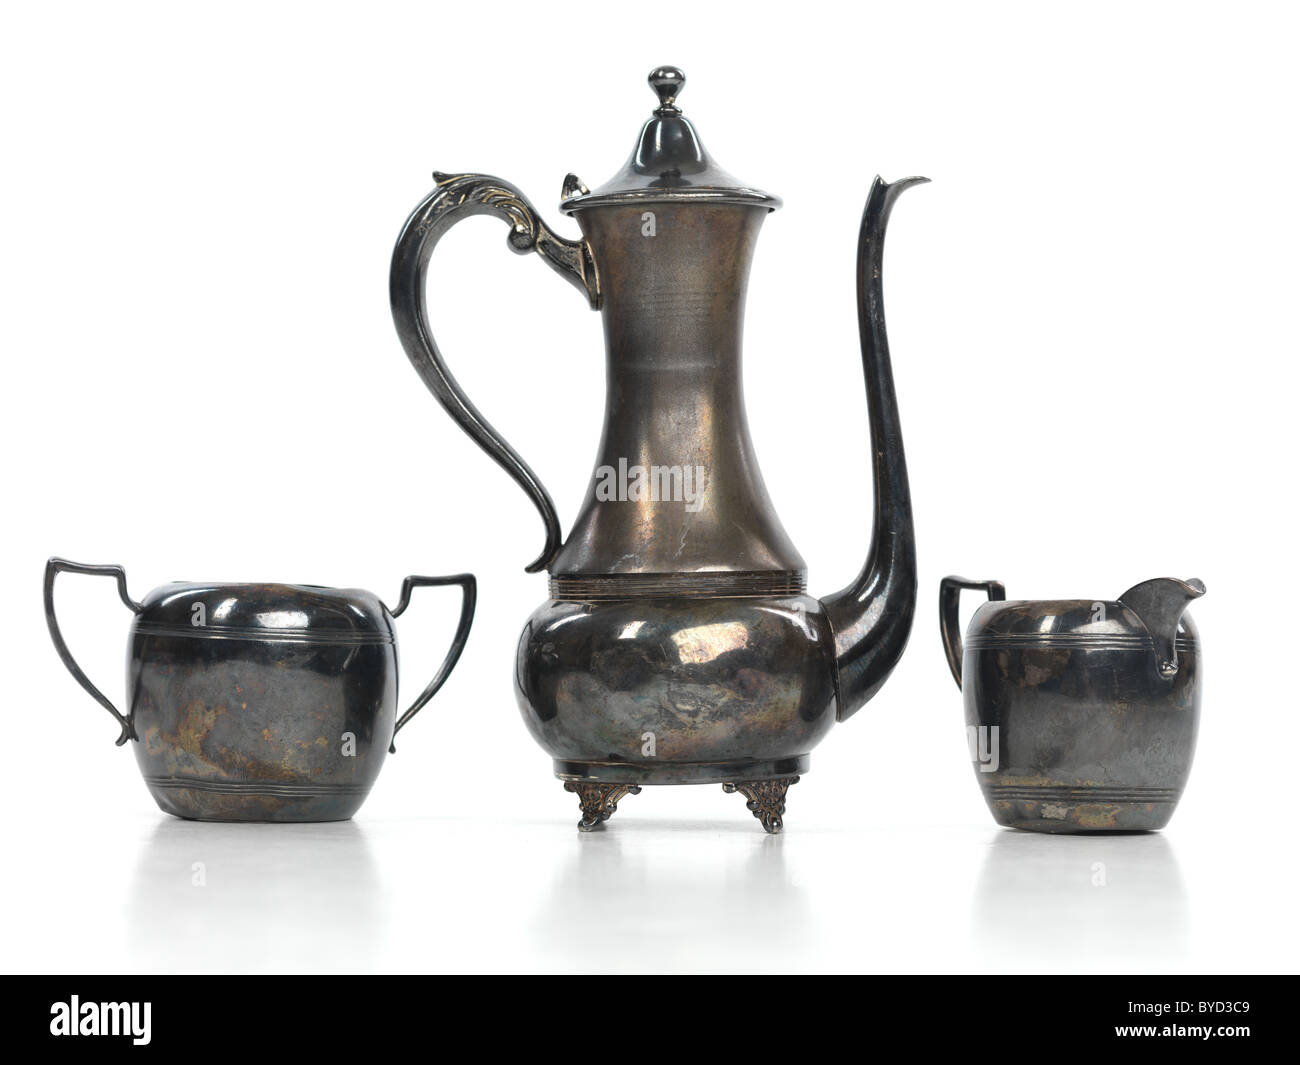 https://c8.alamy.com/comp/BYD3C9/antique-metal-tea-pot-a-milk-jug-and-a-sugar-bowl-isolated-on-white-BYD3C9.jpg